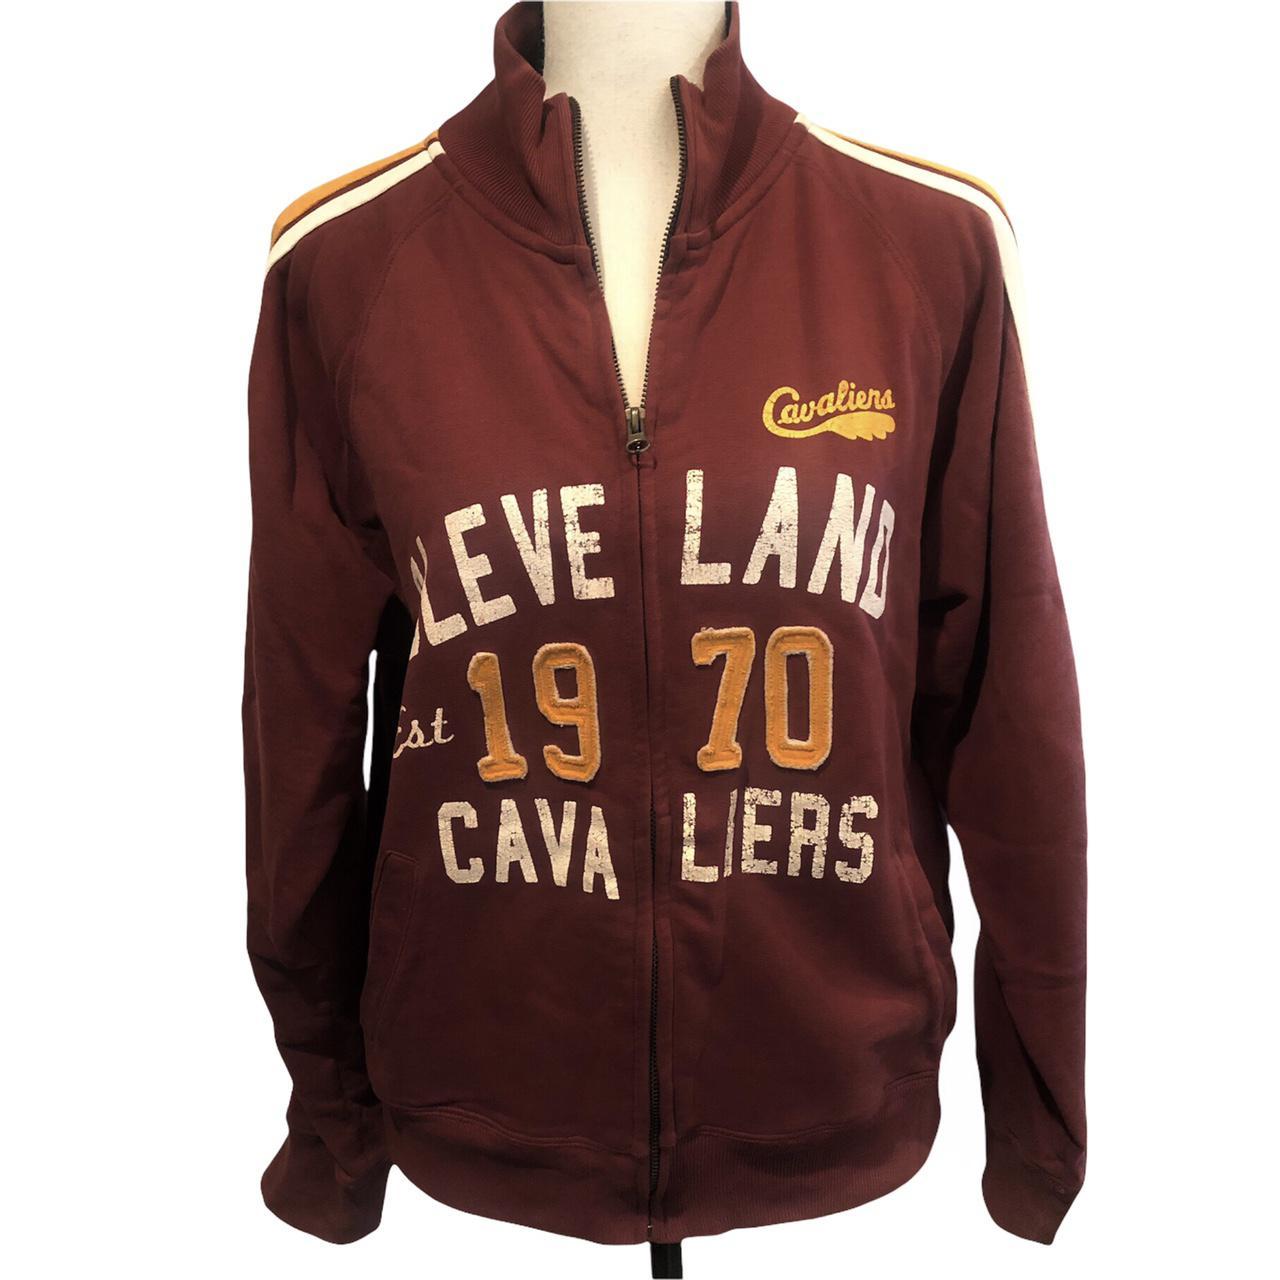 Women's Burgundy and Gold Jacket